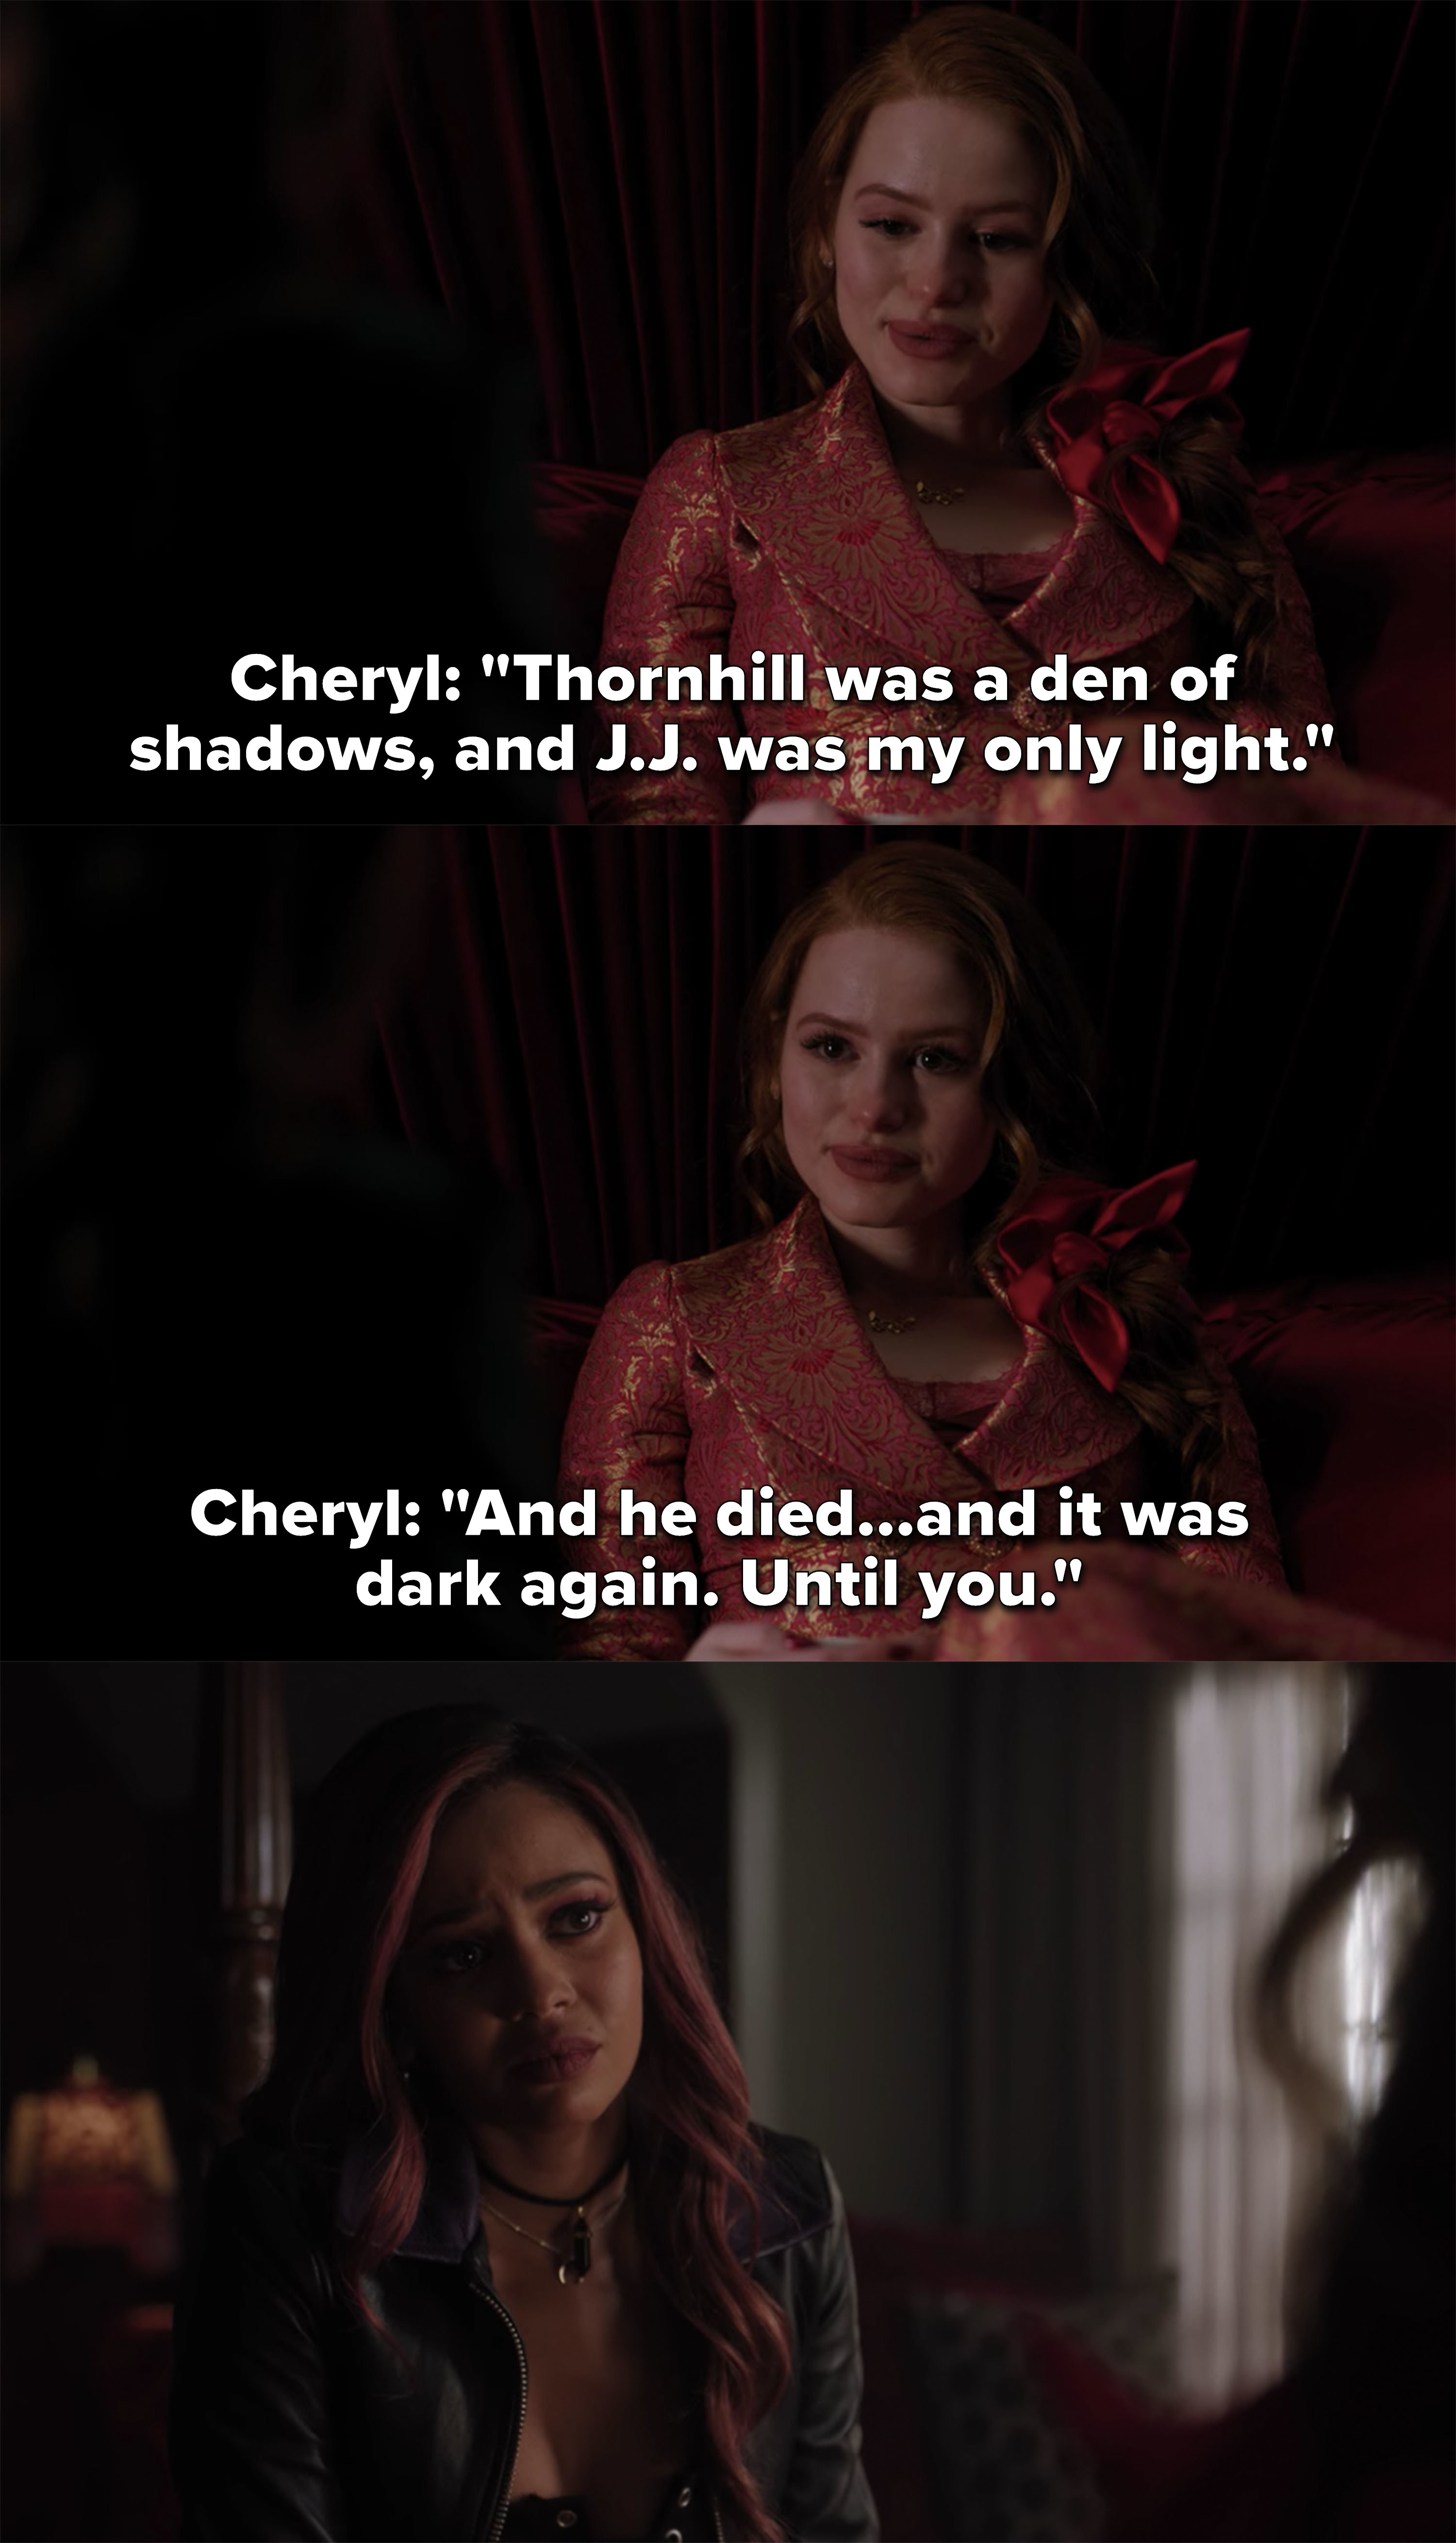 Cheryl says Jason was her only light and after his death it was dark again, until Toni came along